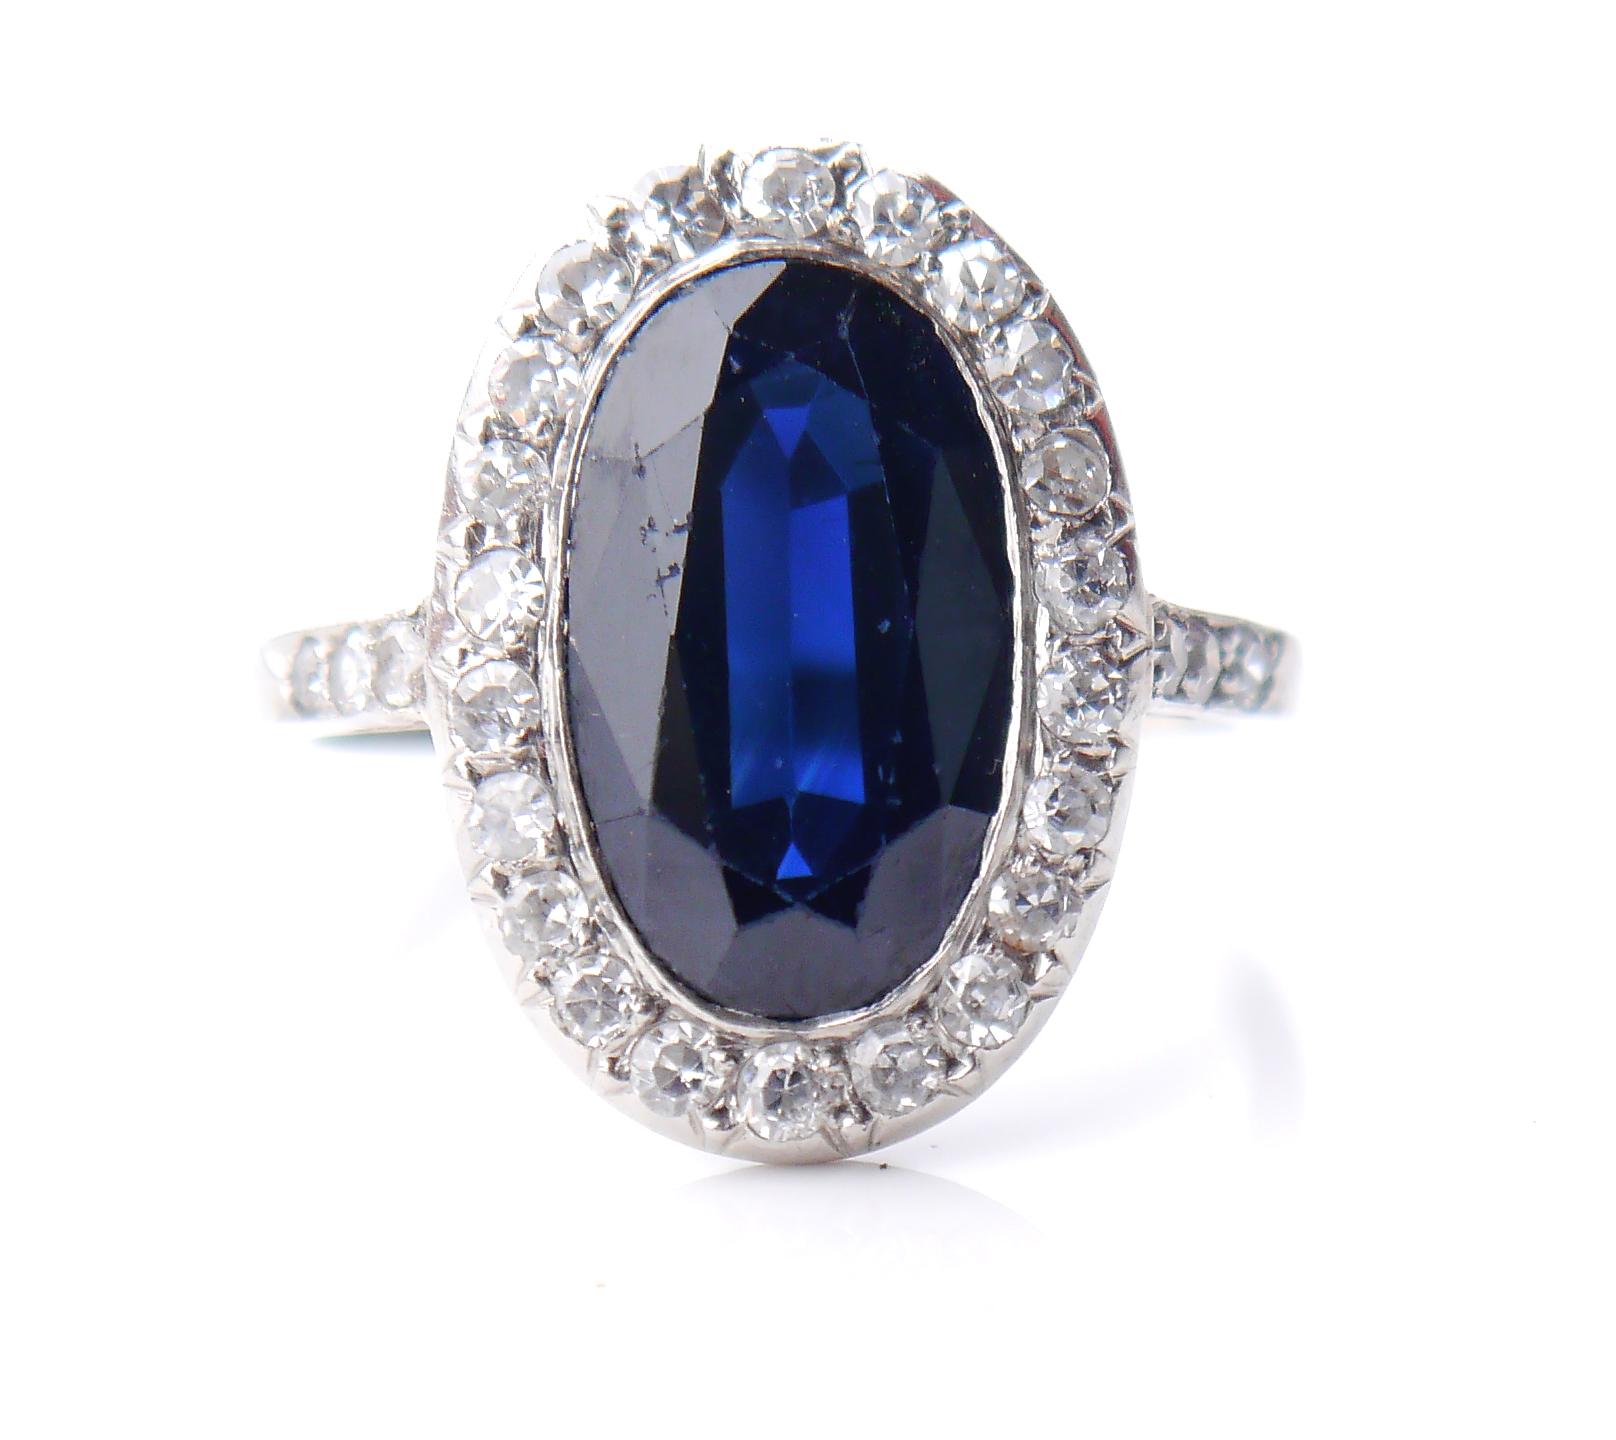 
Beautiful Platinum, Blue Sapphire + Diamonds Halo Flower Ring from 1920 -1930s. Likely German,all metal parts of this ring are made of solid Platinum. 
Crown measures 17 mm x 12 mm x 5 mm. 
Oval cut natural Blue Sapphire stone of darker tone is